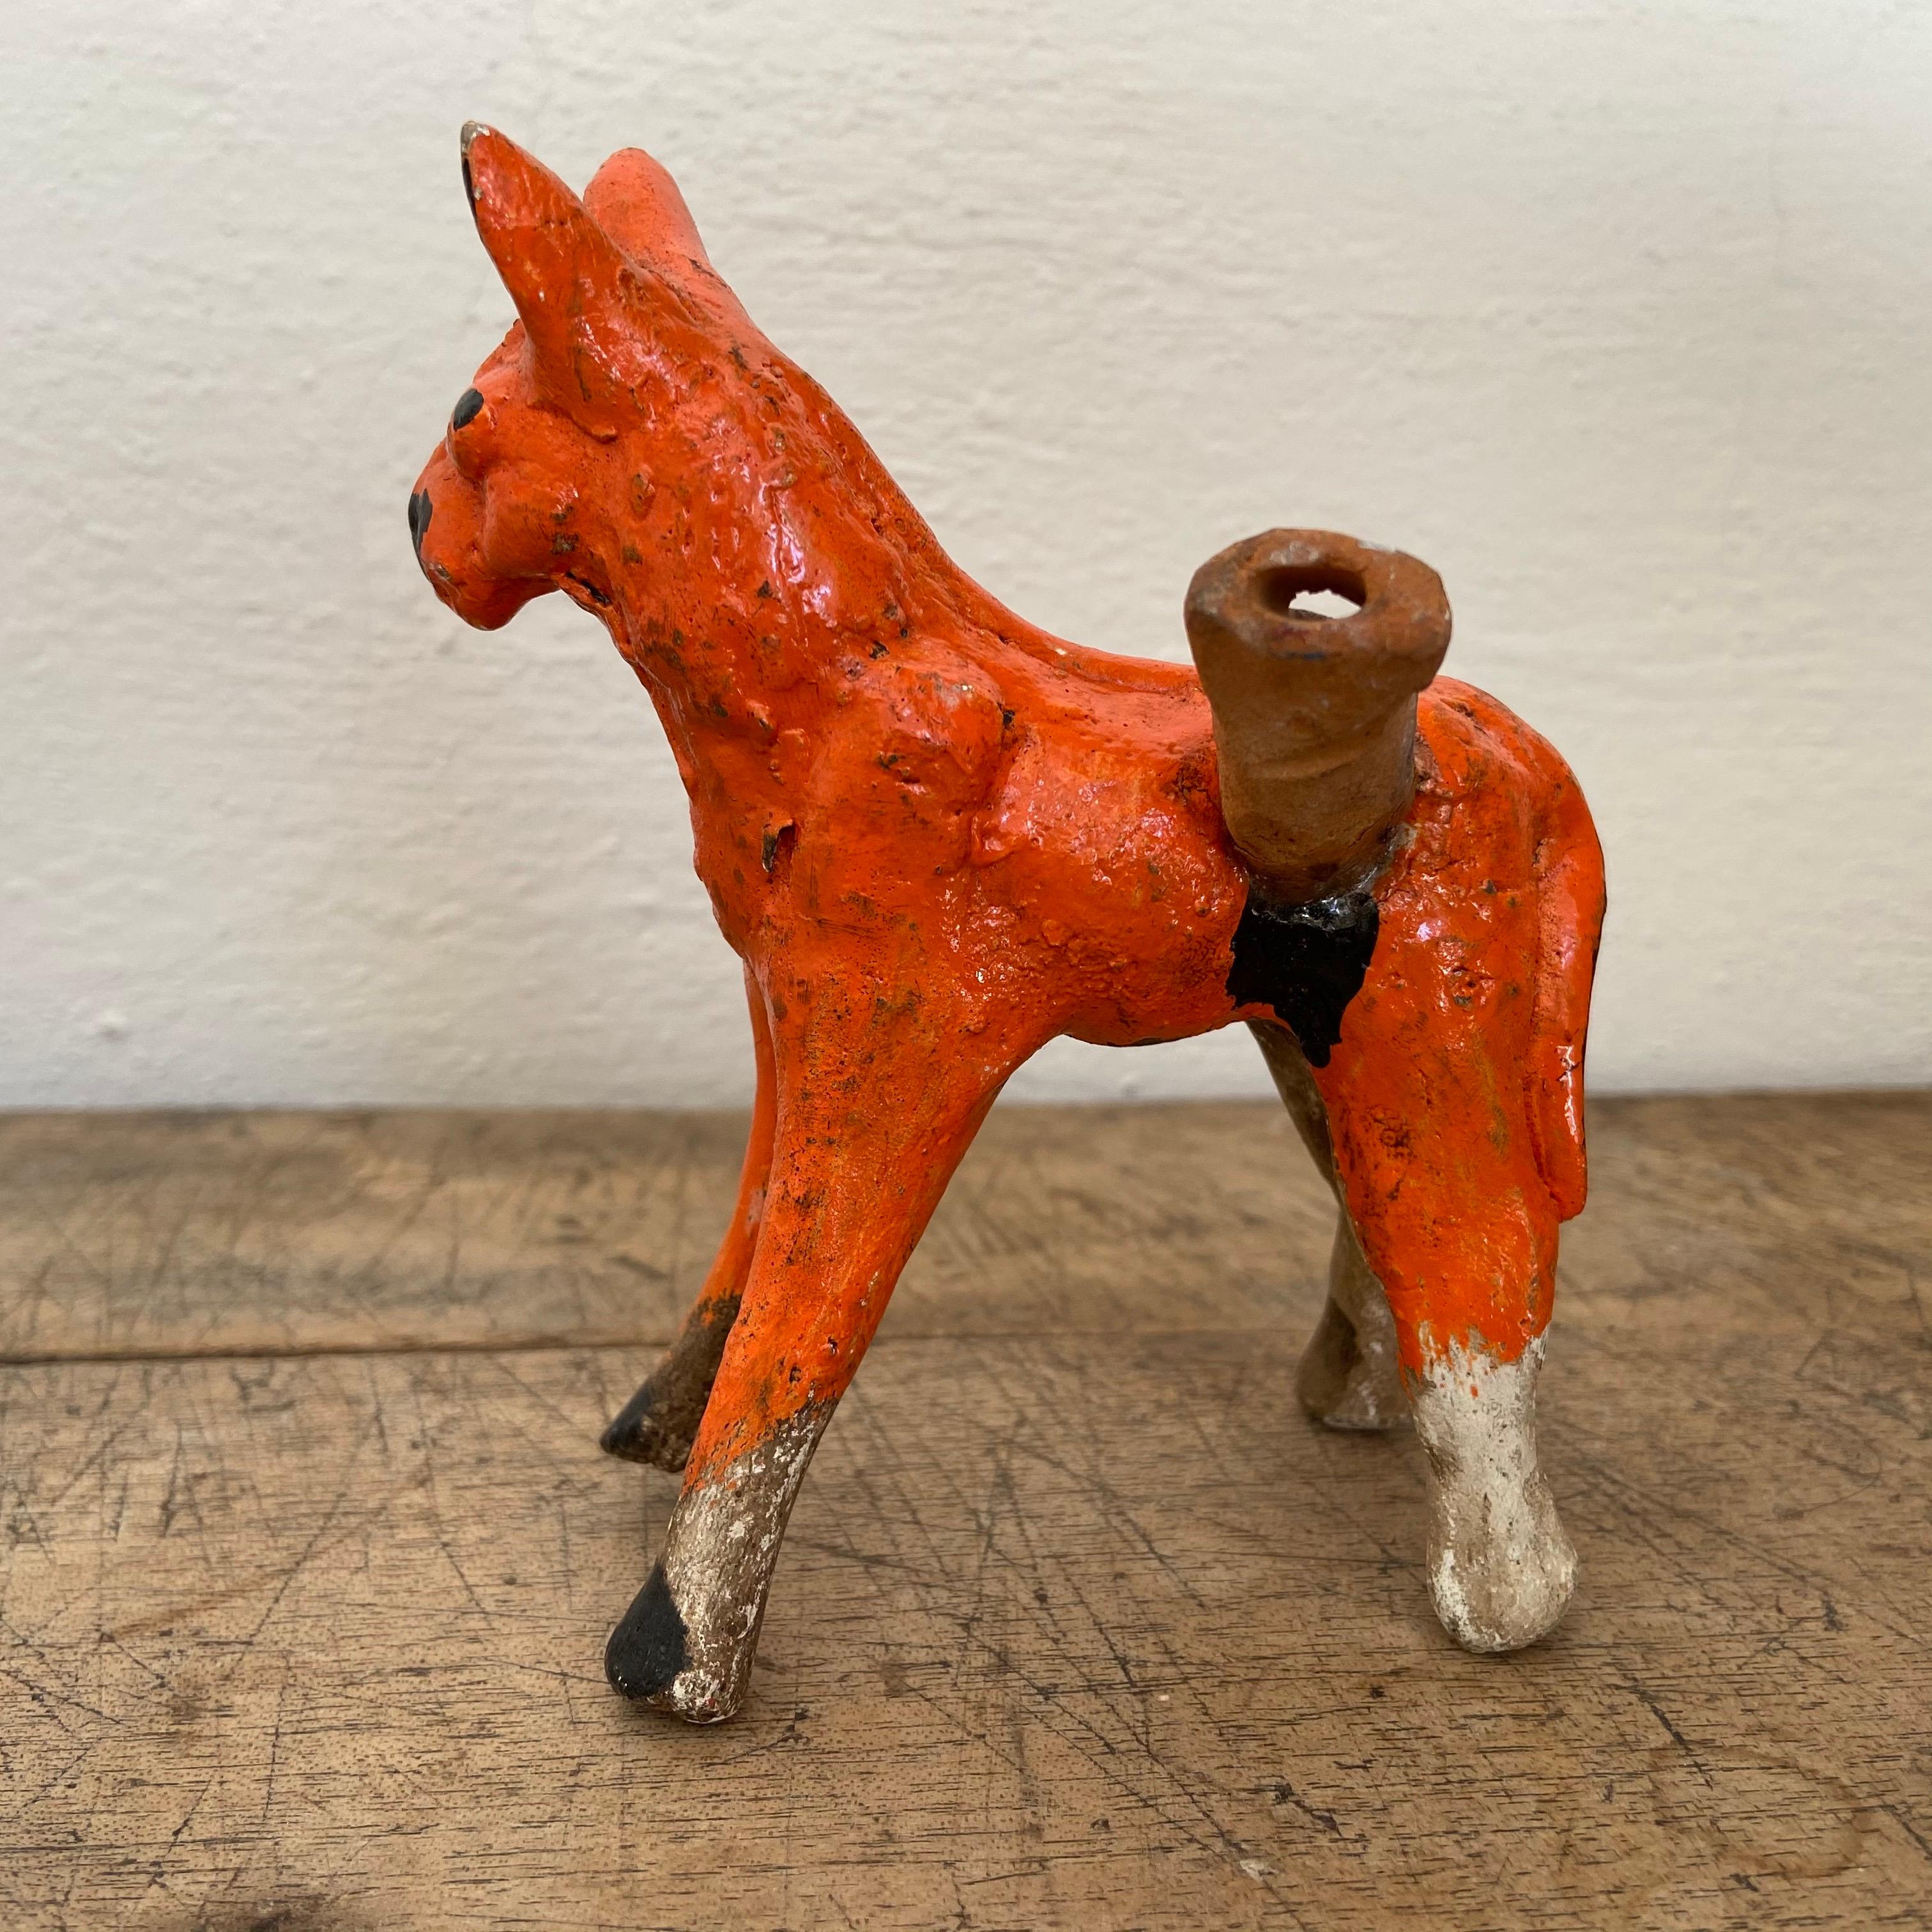 Orange and black glazed horse figure and whistle from Morelos, Mexico, 1980s. These Folk Art ceramic figures were available during traveling carnivals throughout Mexico in the early 1980s.